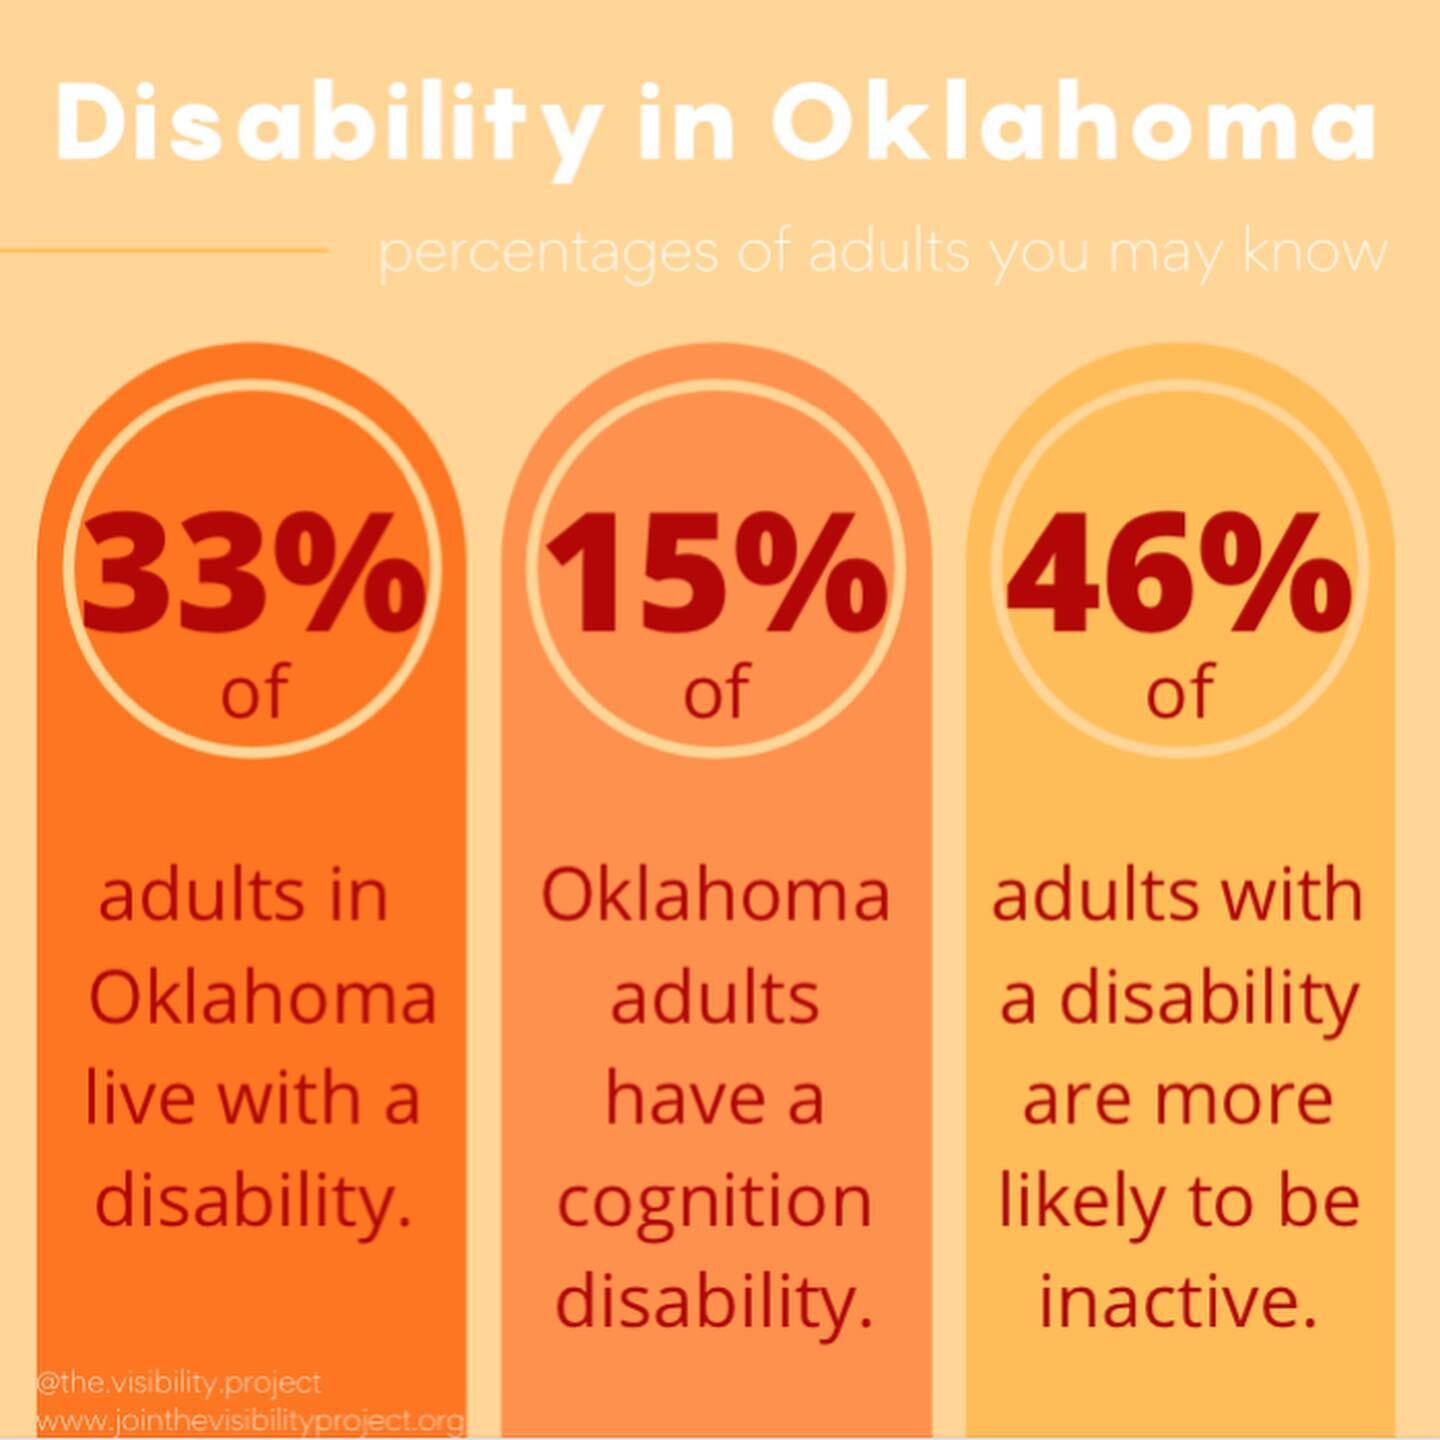 The Americans with Disabilities Act prohibits the discrimination against the 33% of adult Oklahomans who have disabilities. Here is some information about how the ADA helps those with disabilities.